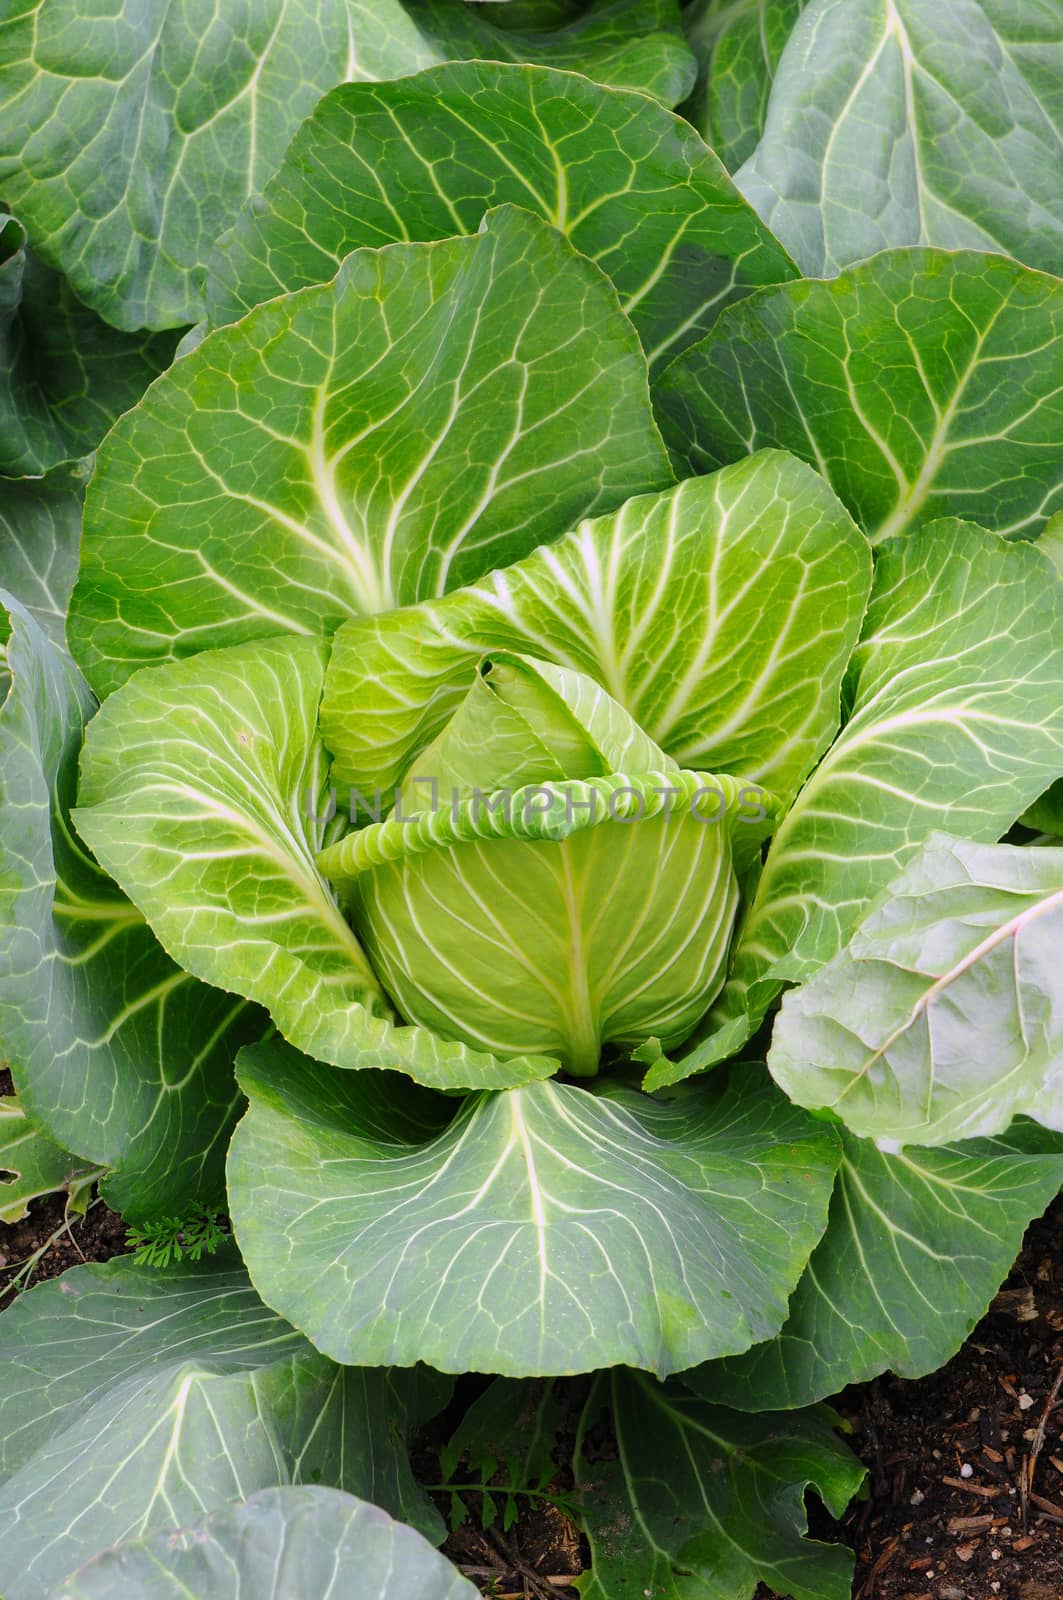 Close up of a Green Cabbage Plant, Brassica oleracea Linne.